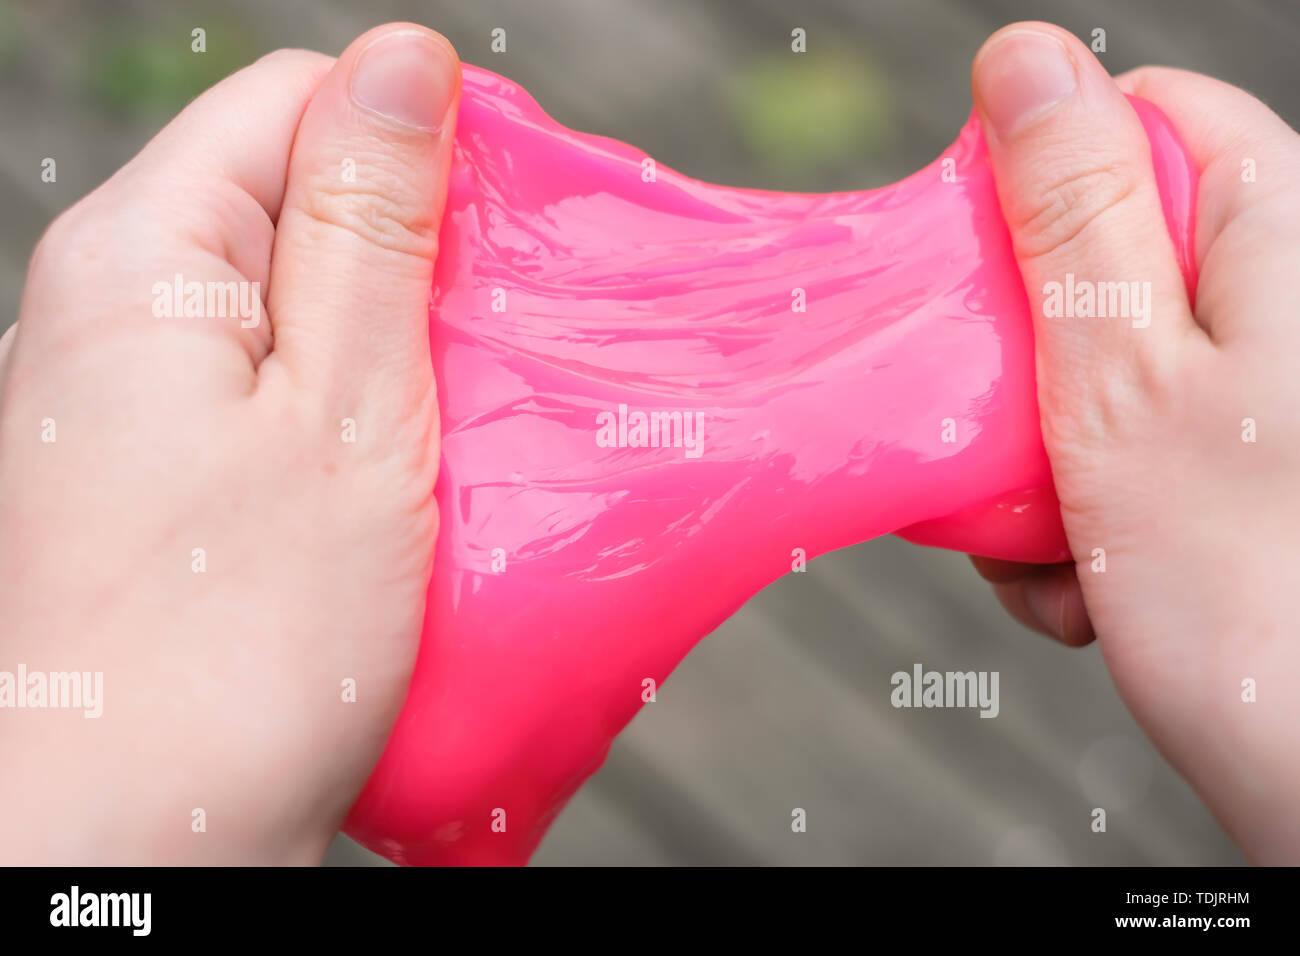 Pink anti stress toy slime in hands. Fighting anxiety and stress. Creative game experiment for children. Stock Photo